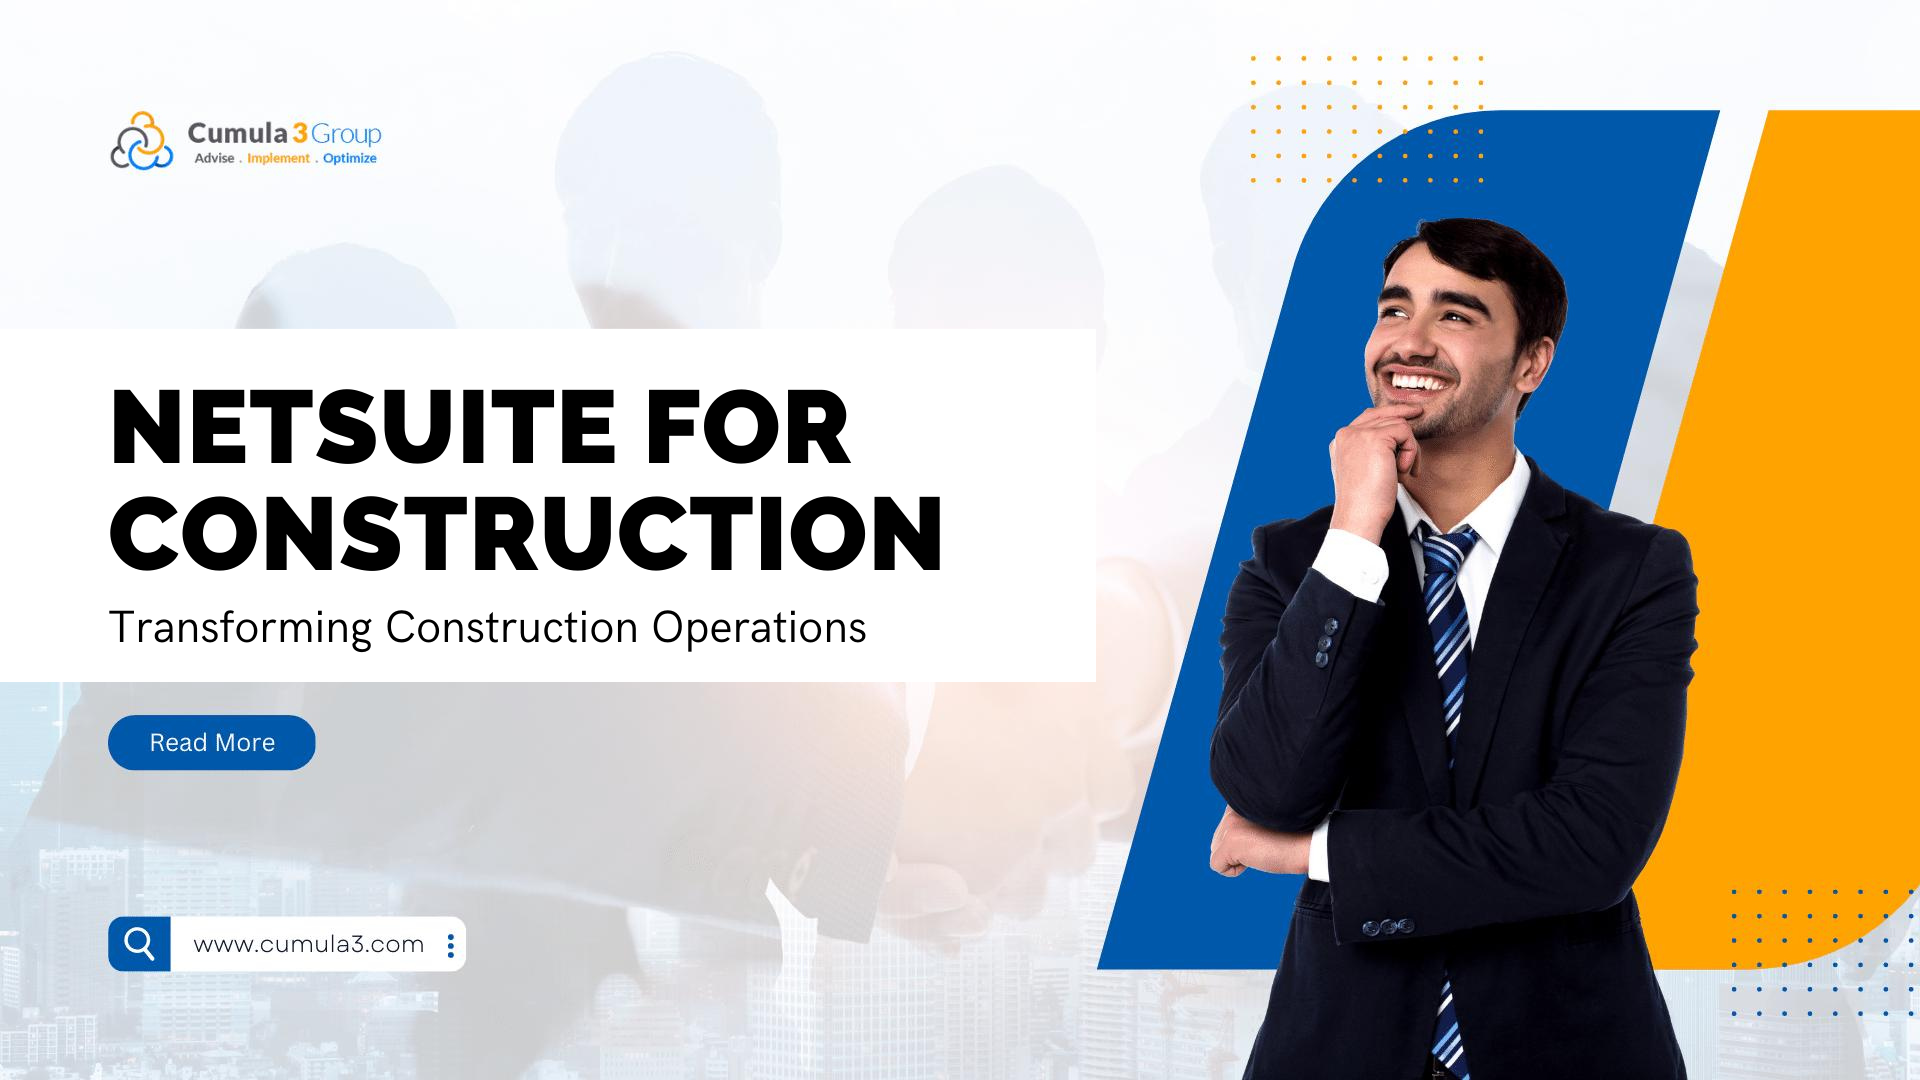 NetSuite for Construction: Transforming Construction Operations